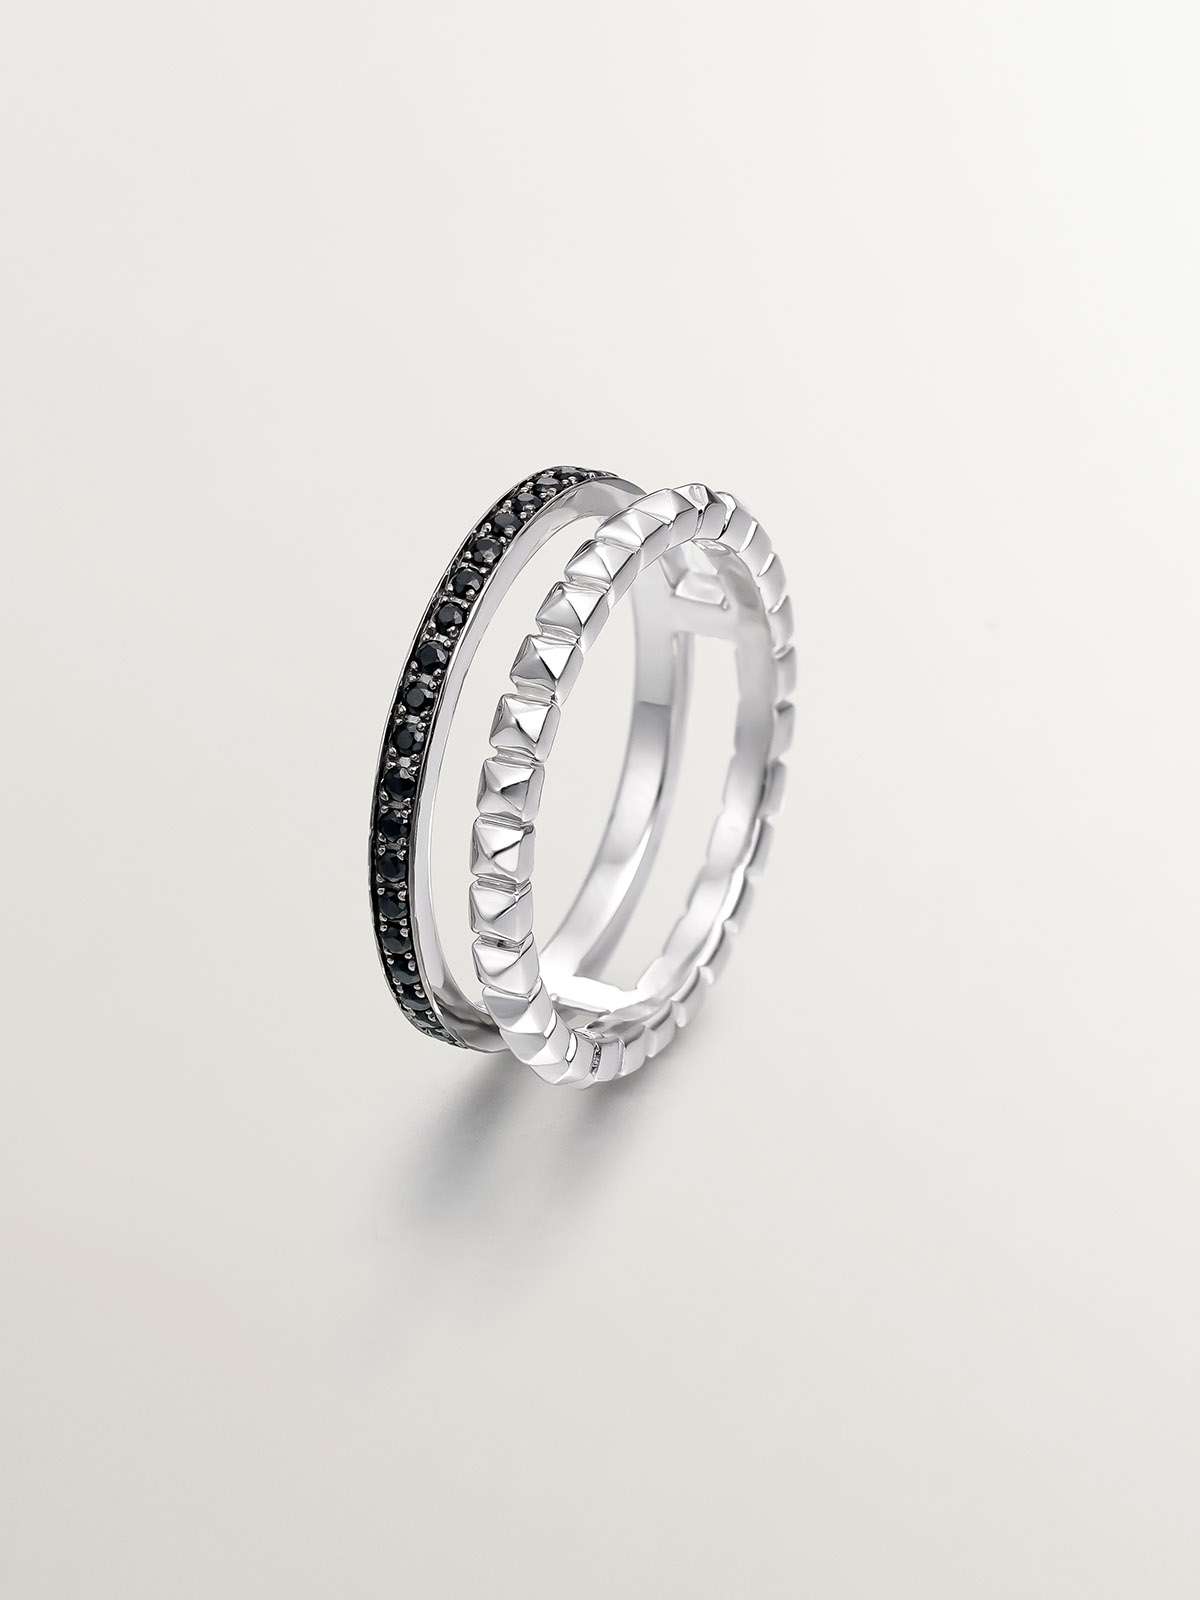 925 Silver double ring with embossing and black spinels.